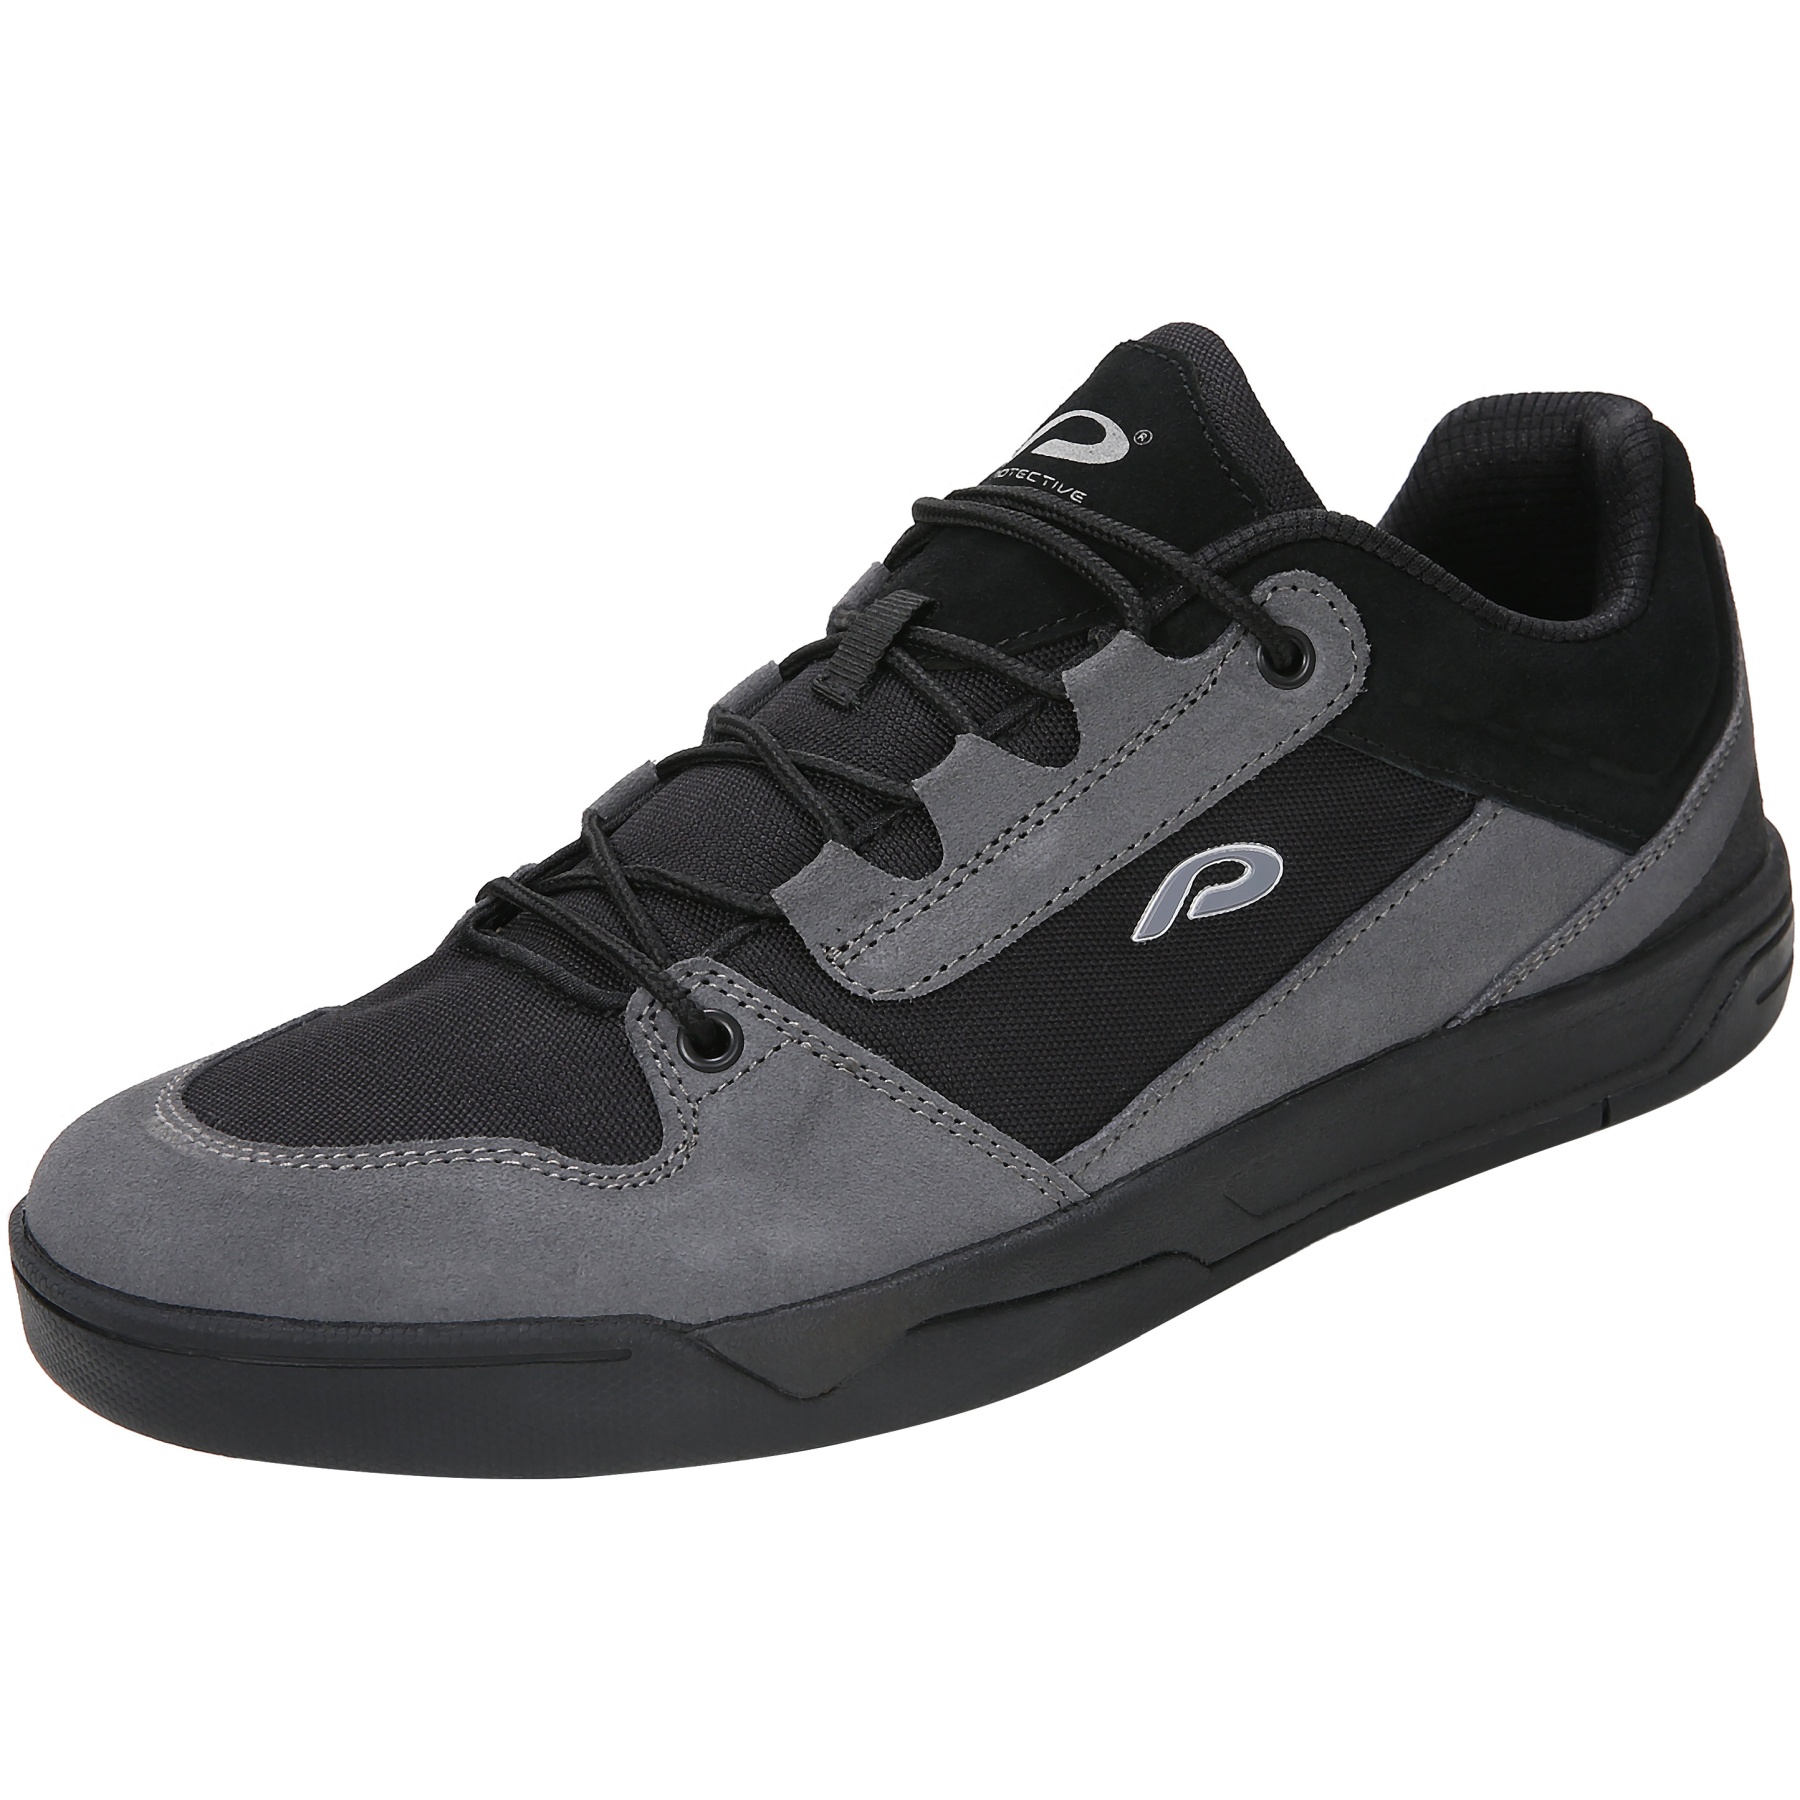 Picture of PROTECTIVE P-Skids Unisex Shoes - black